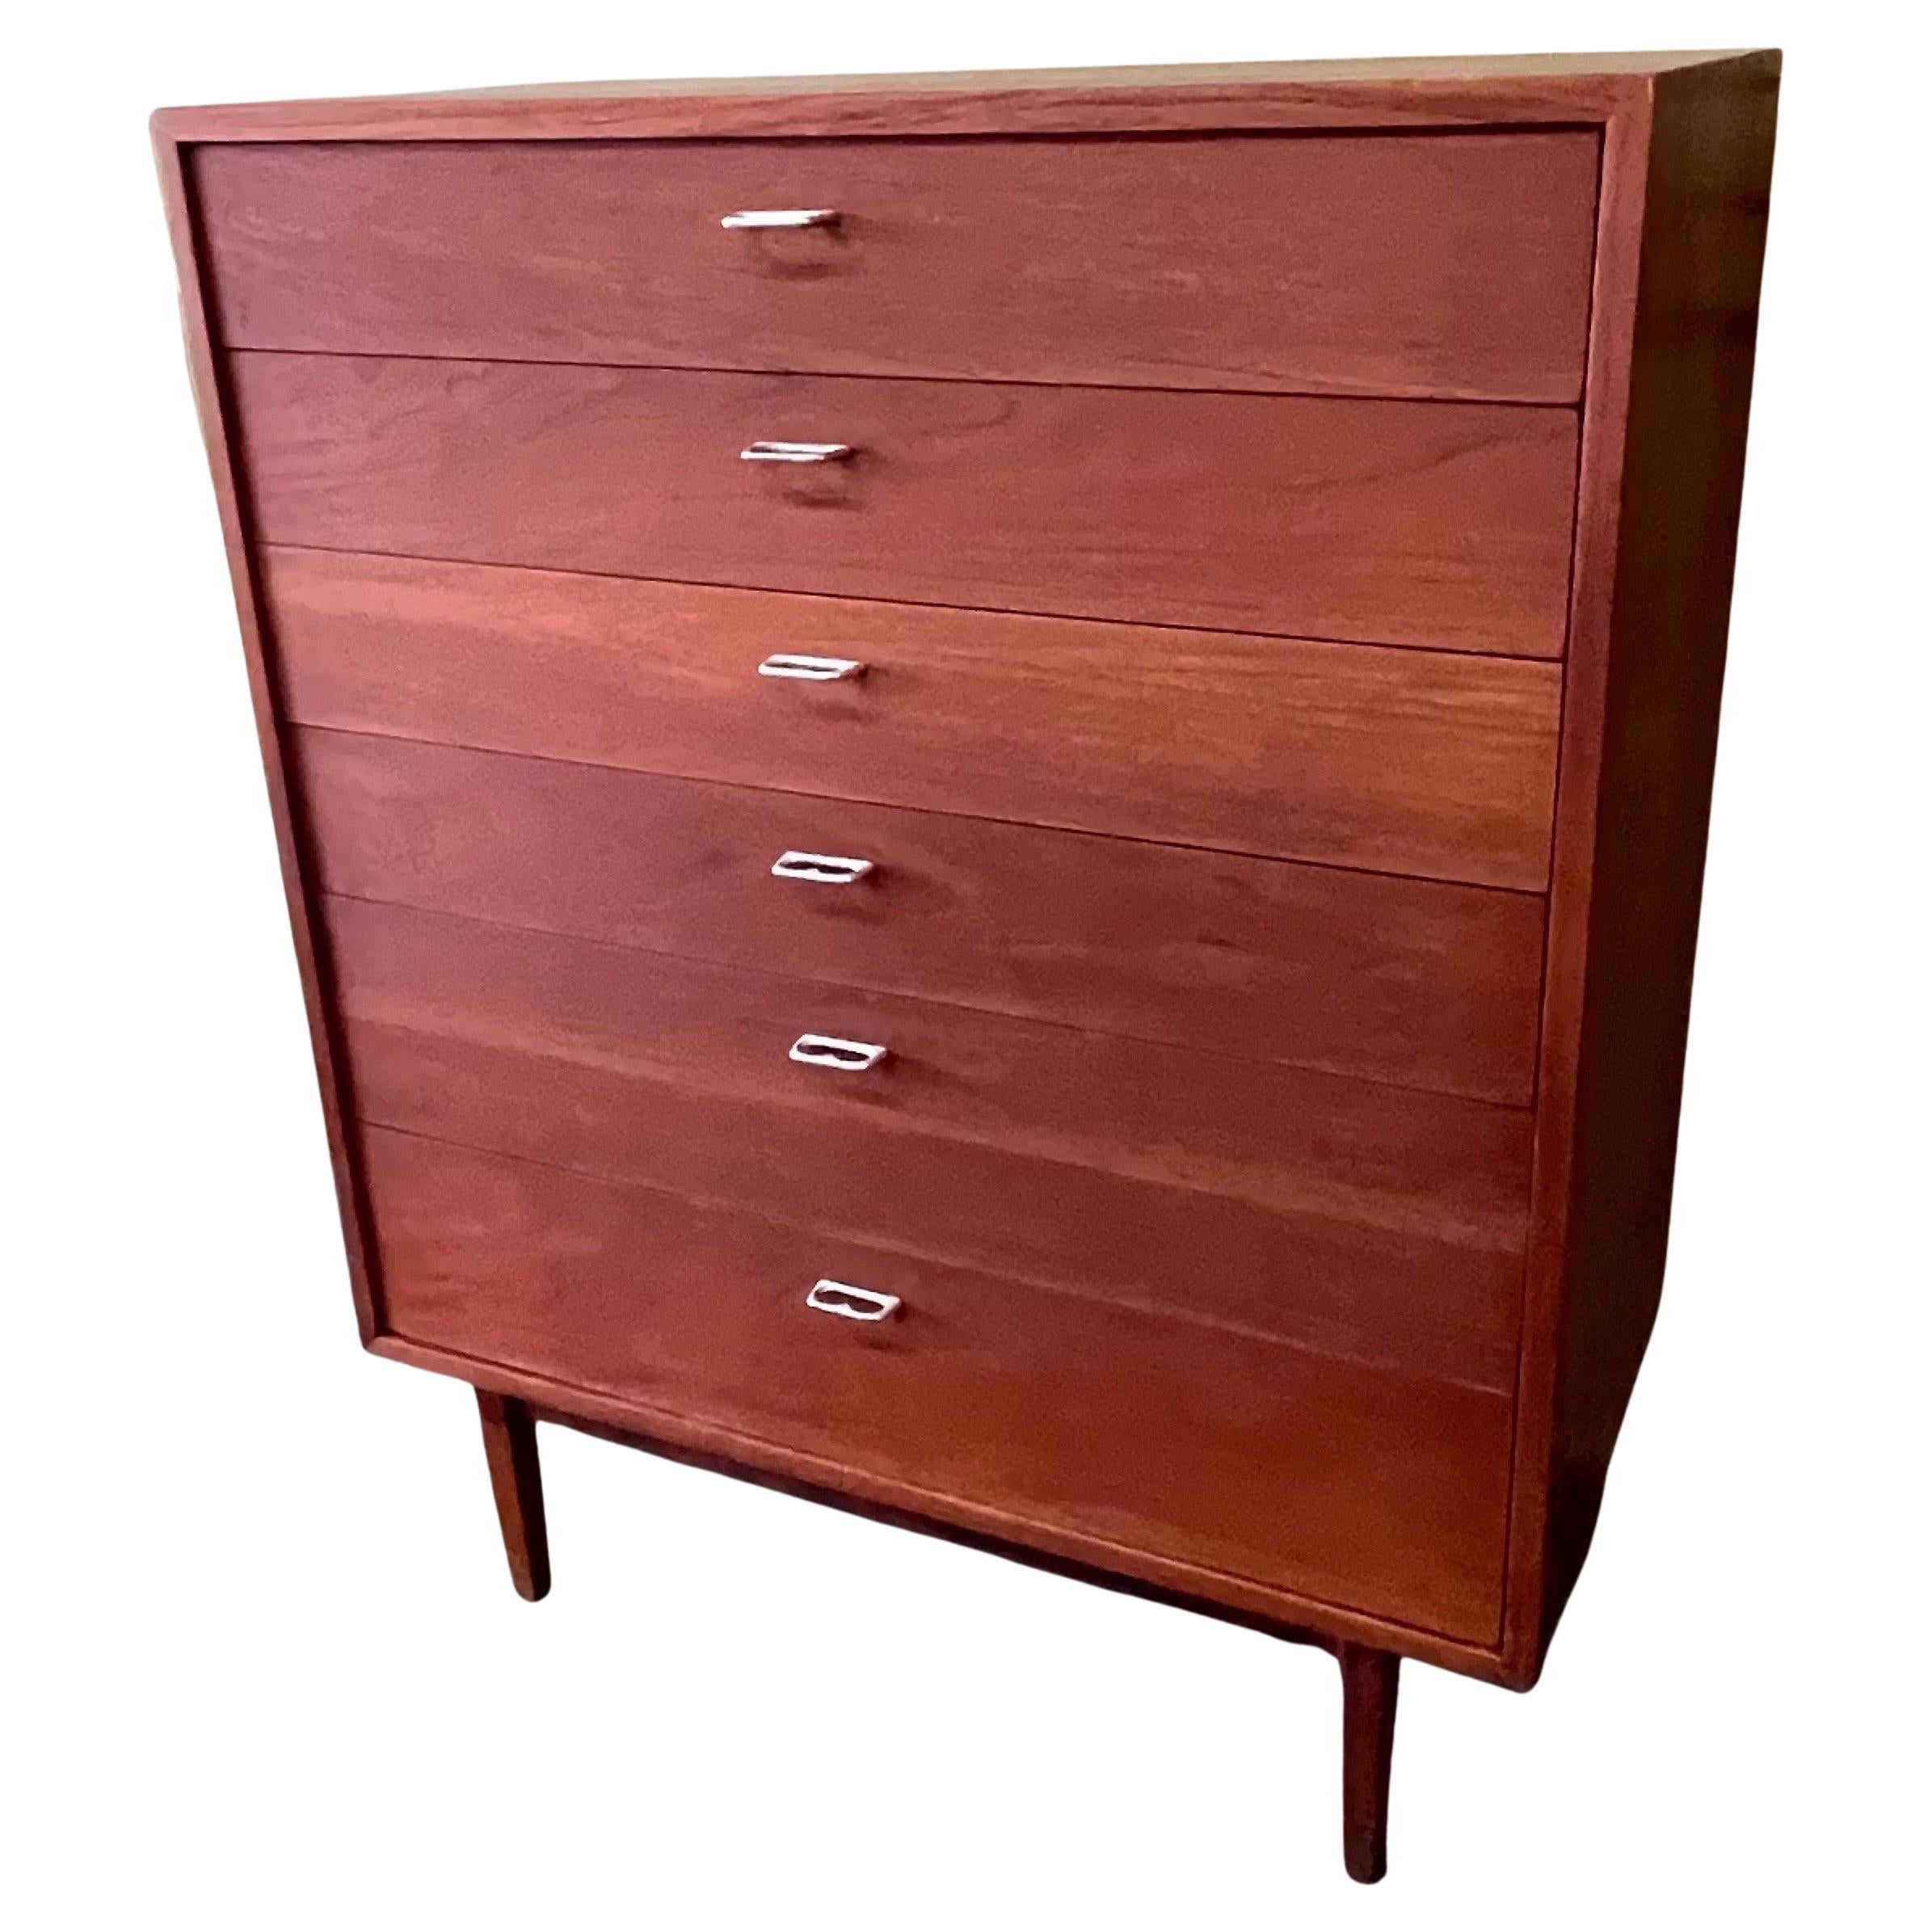 Fabulous MCM walnut six drawer highboy dresser with aluminum two finger pulls in the style of George Nelson, circa 1960s. The piece has been professionally refinished and is in great restored condition with beautiful grained veneer, solid wood